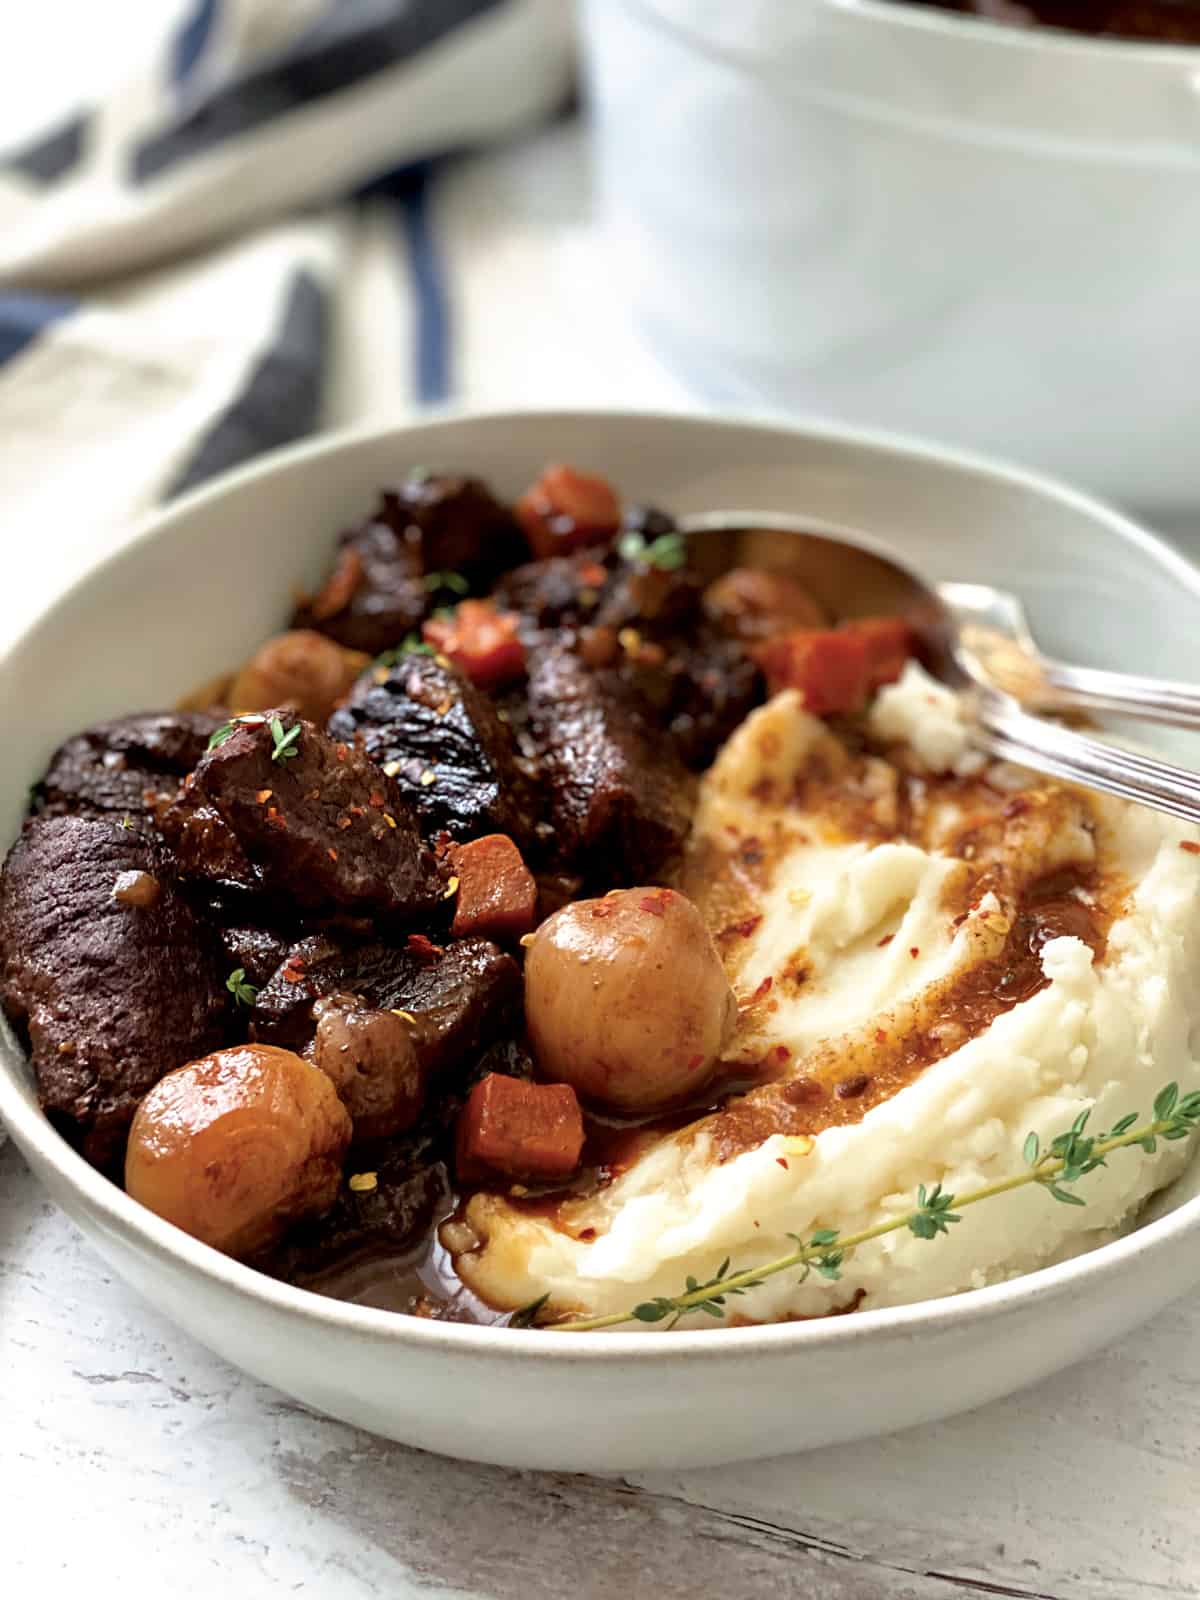 A plate with beef stew and mashed potatoes. At the back a white pot and a cloth napkin.